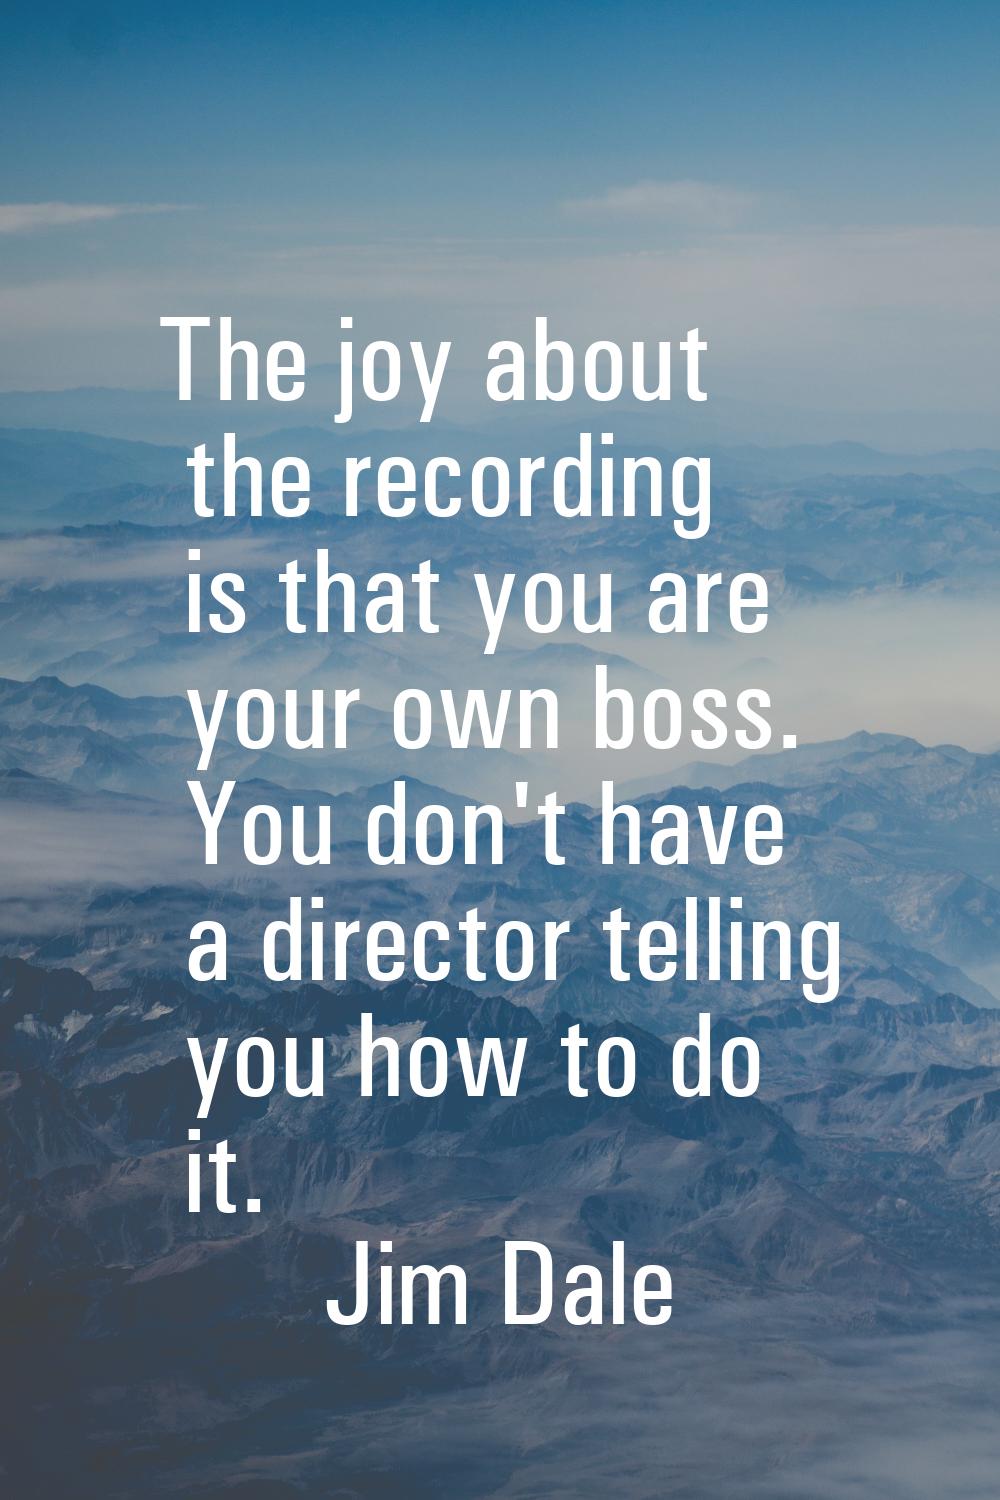 The joy about the recording is that you are your own boss. You don't have a director telling you ho